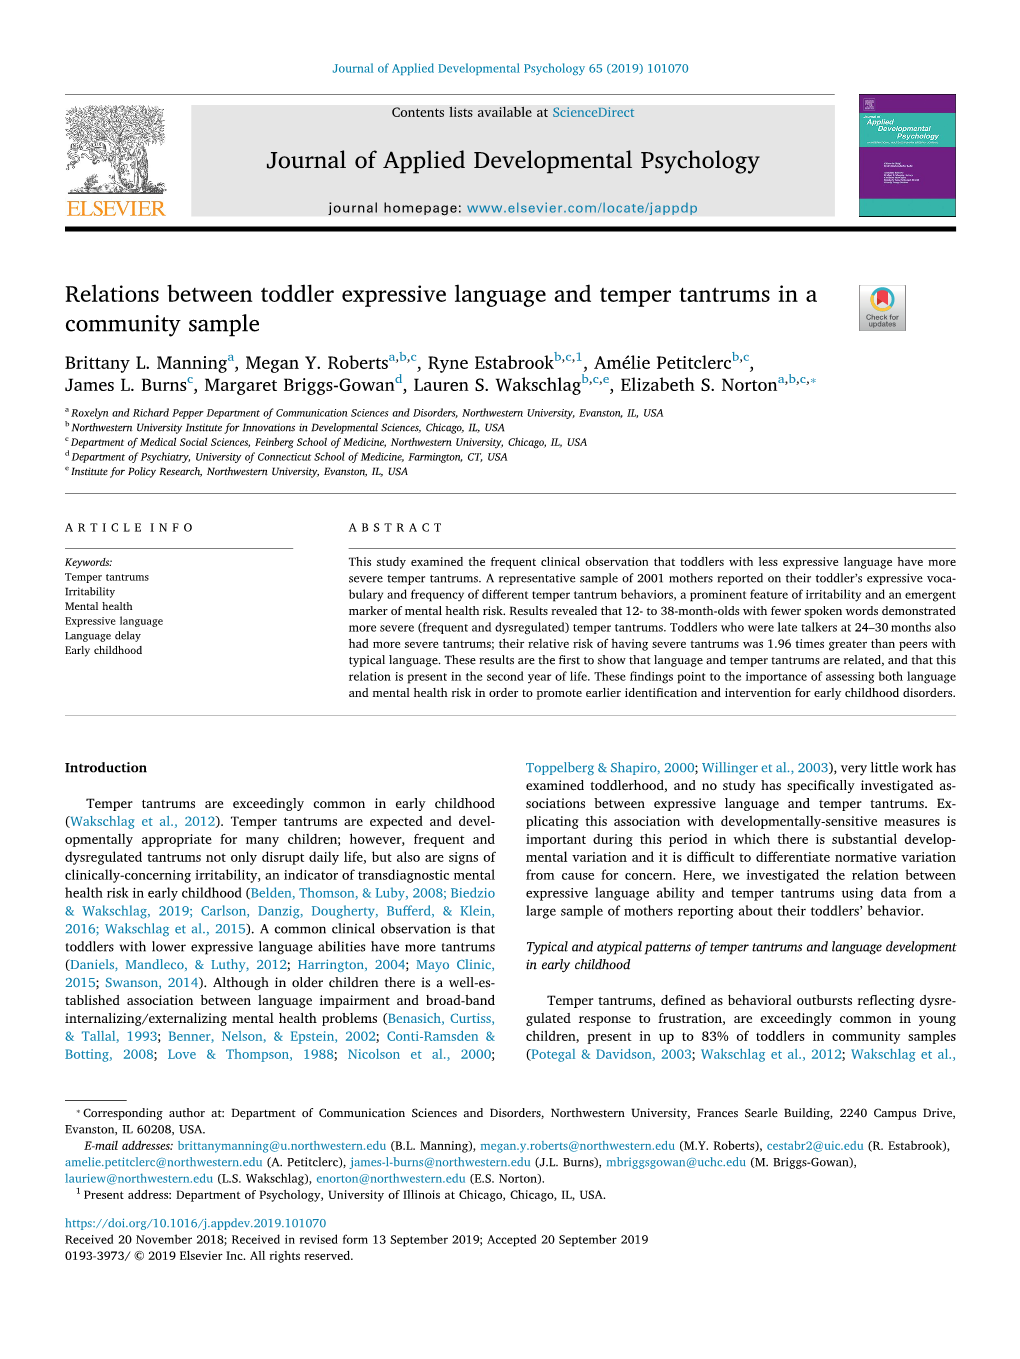 Relations Between Toddler Expressive Language and Temper Tantrums in a T Community Sample Brittany L